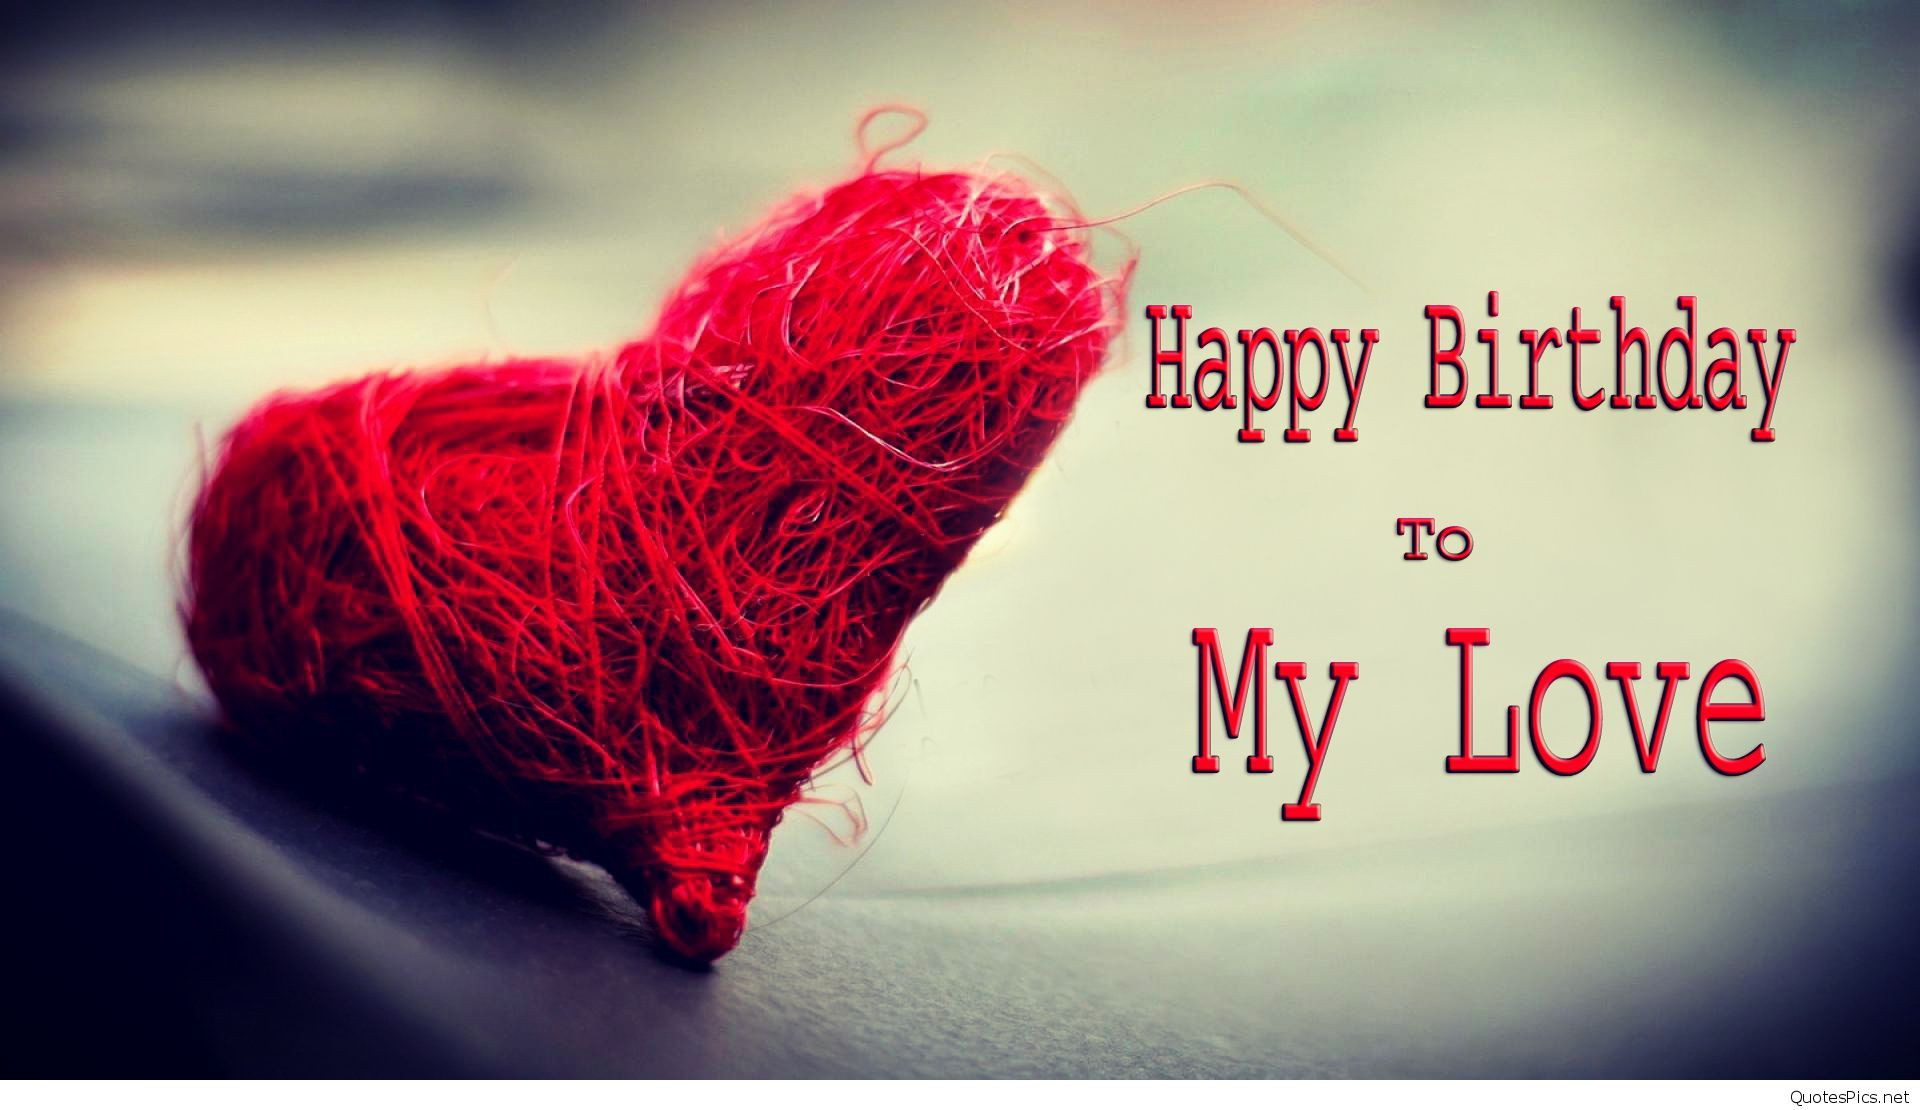 Happy Birthday I Love You Quotes
 Love happy birthday wishes cards sayings